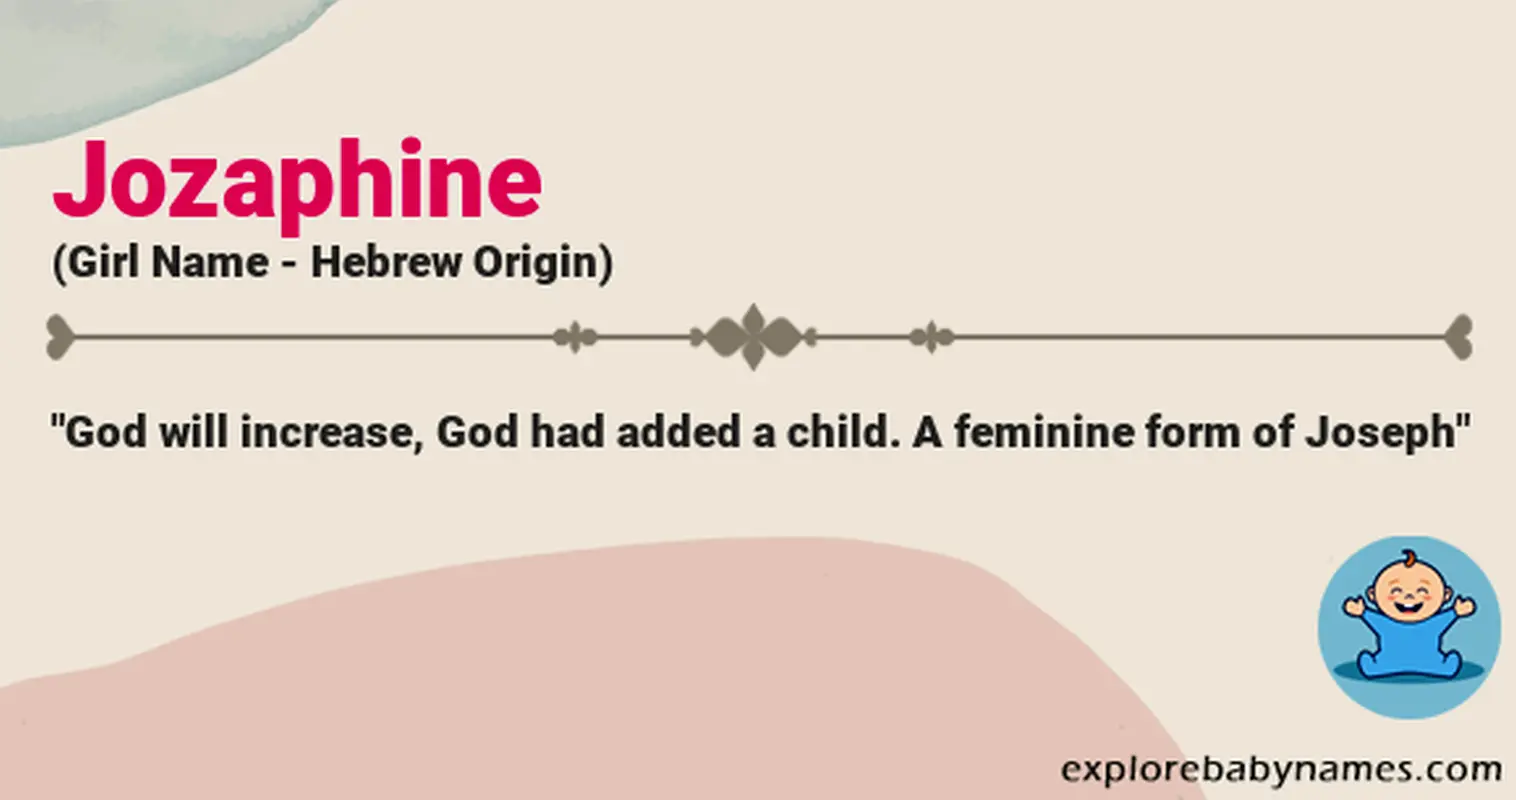 Meaning of Jozaphine